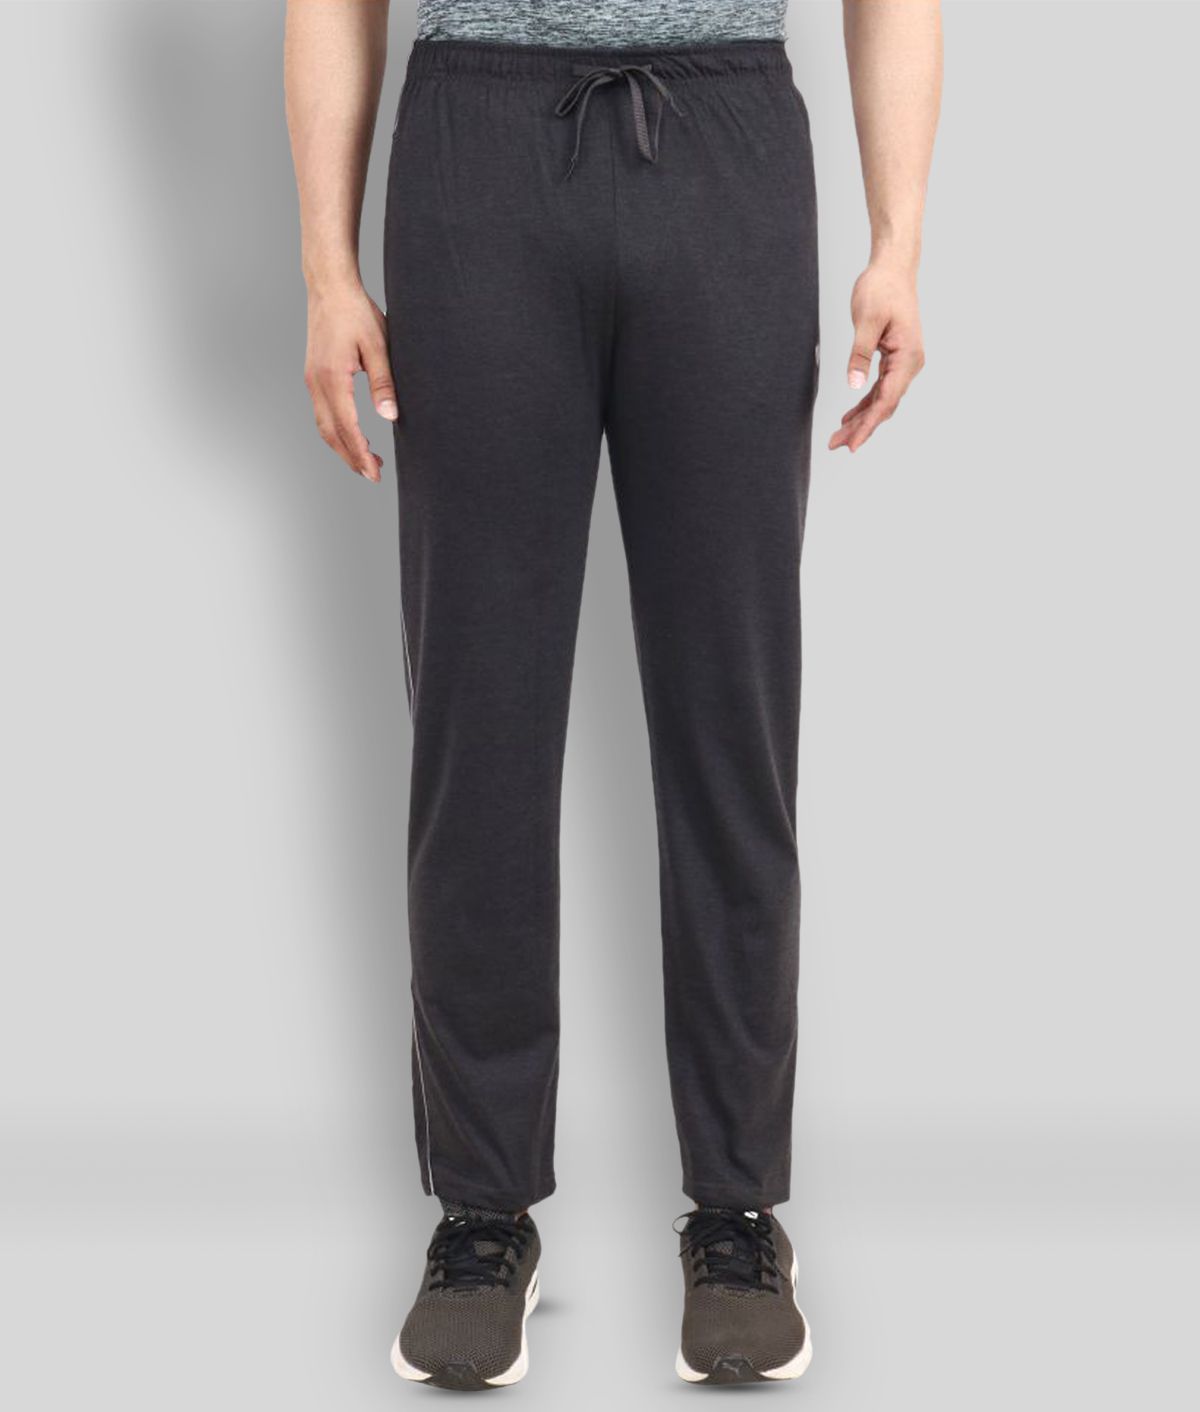     			NEUVIN - Charcoal Cotton Men's Trackpants ( Pack of 1 )